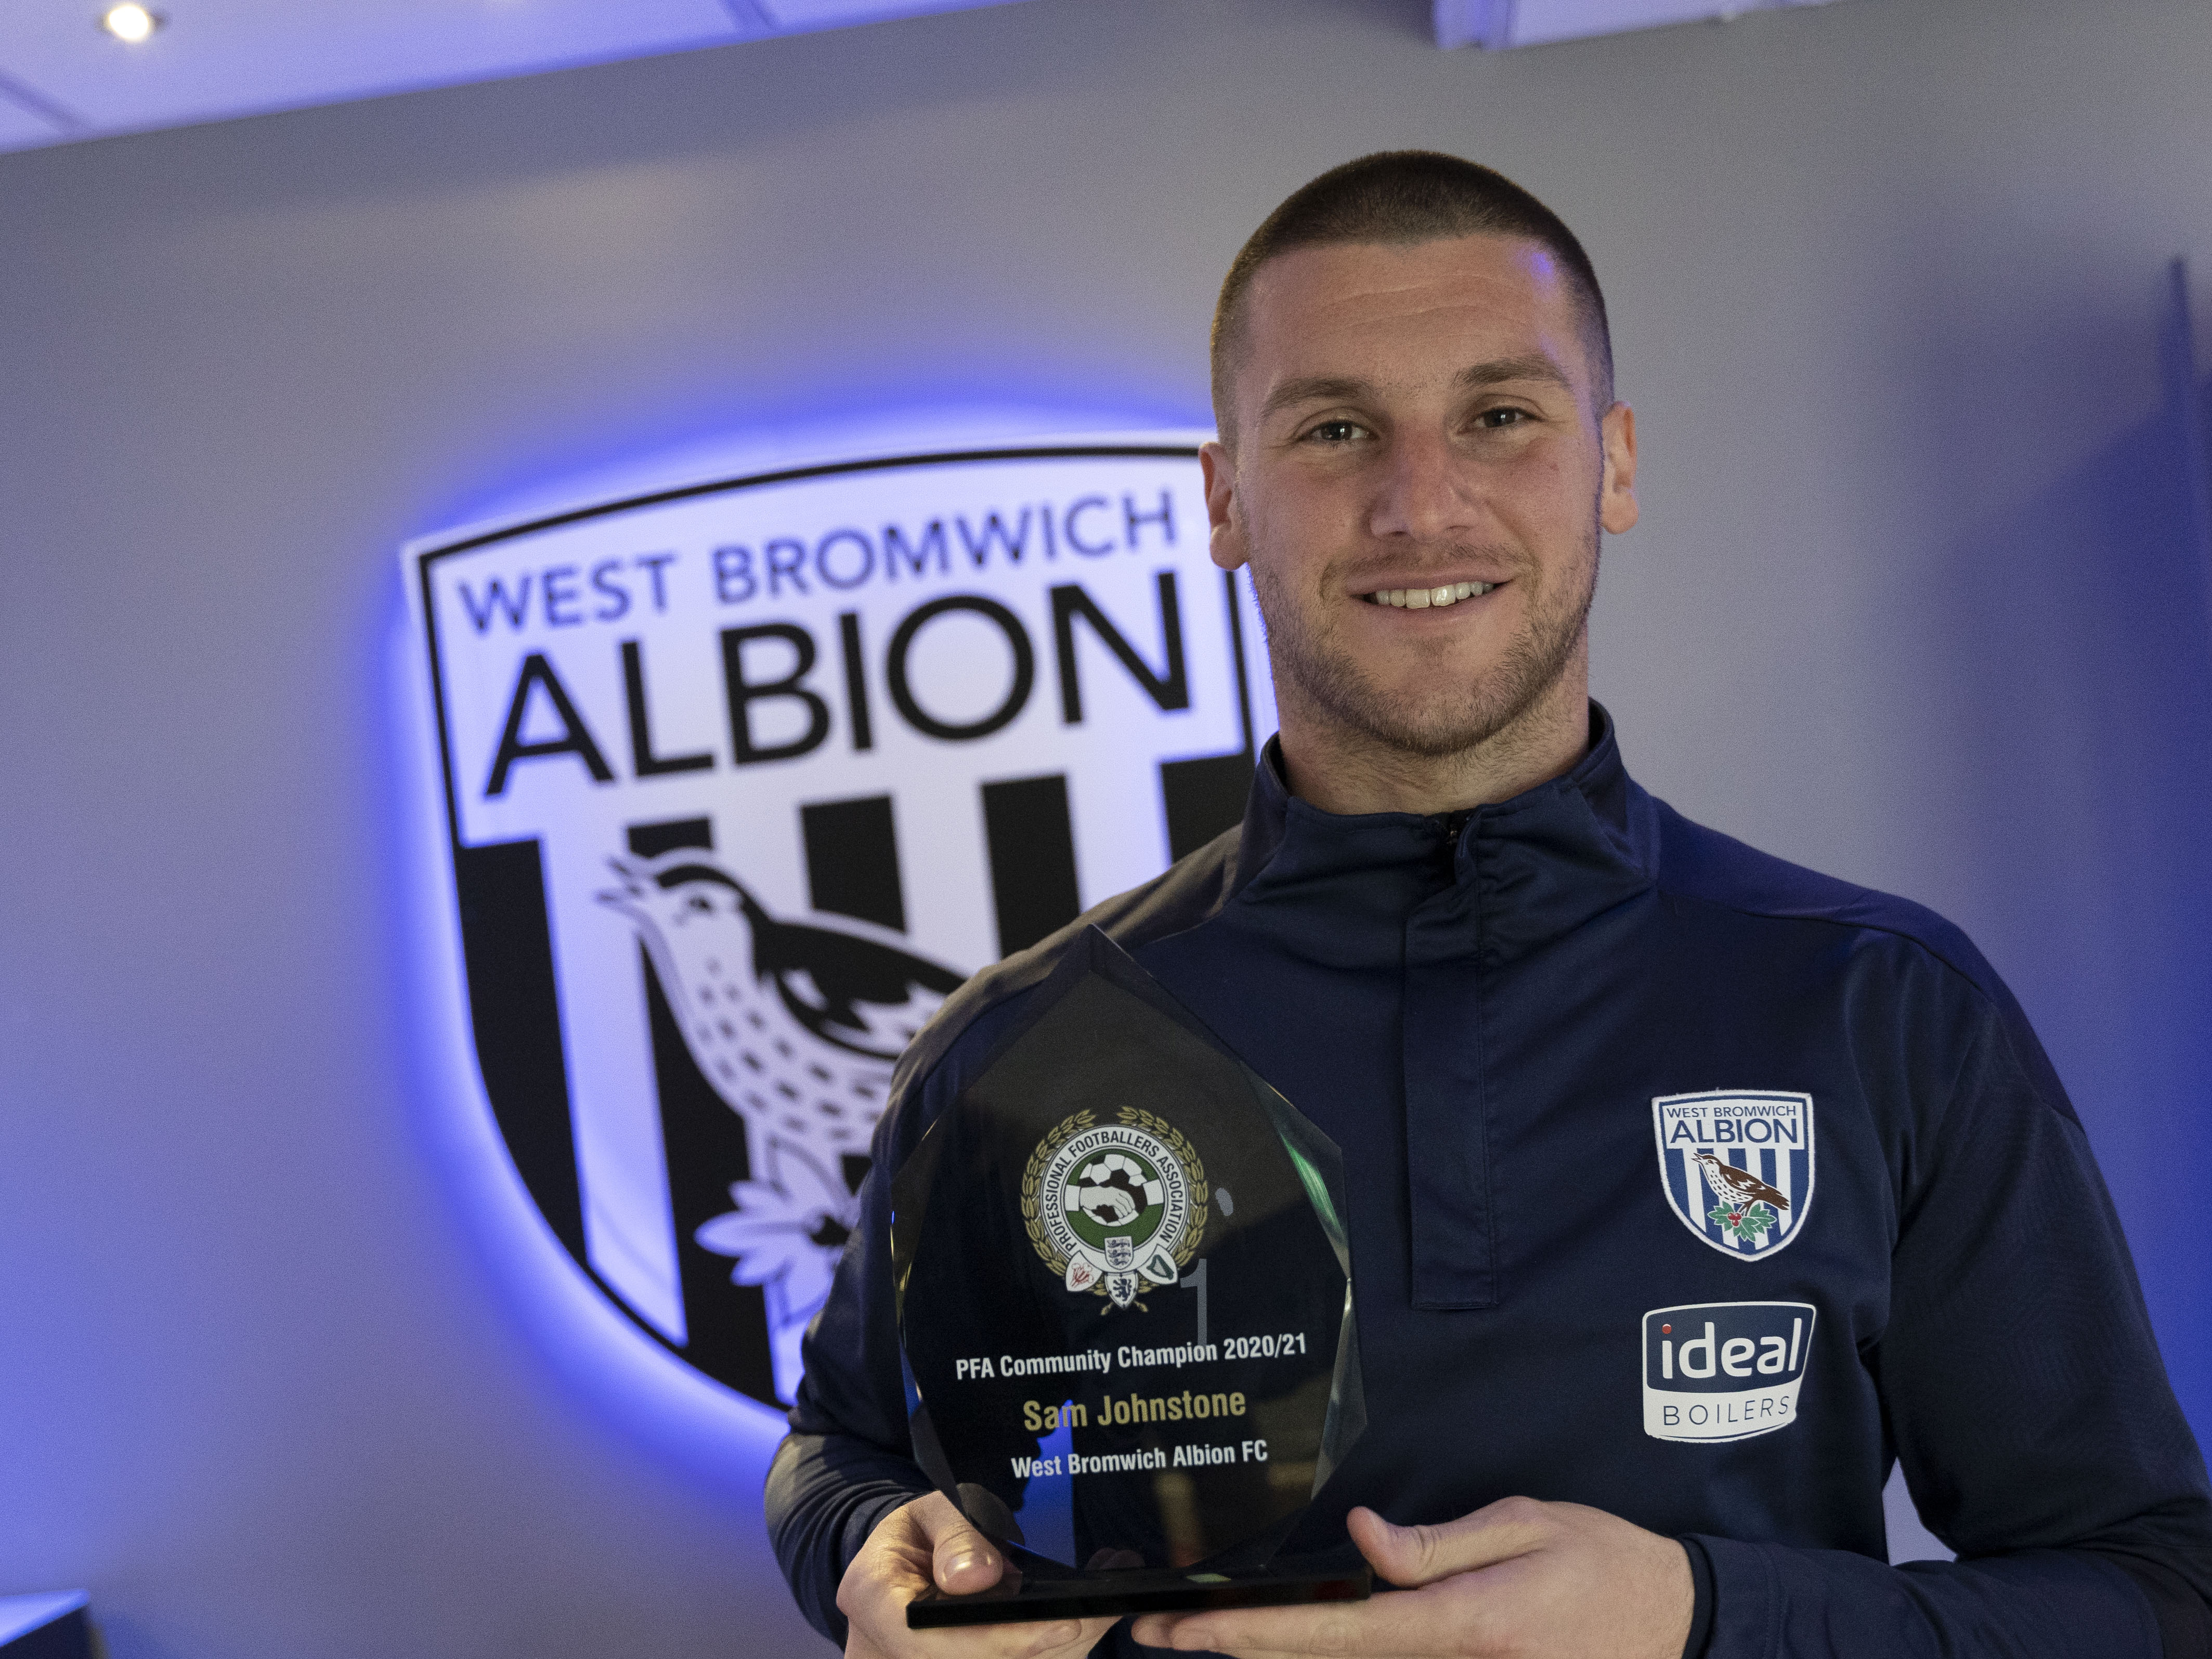 And as well as stunning showings on the pitch, Sam’s also been recognised by The Albion Foundation for his stellar work off of it by winning the PFA Community Champion Award